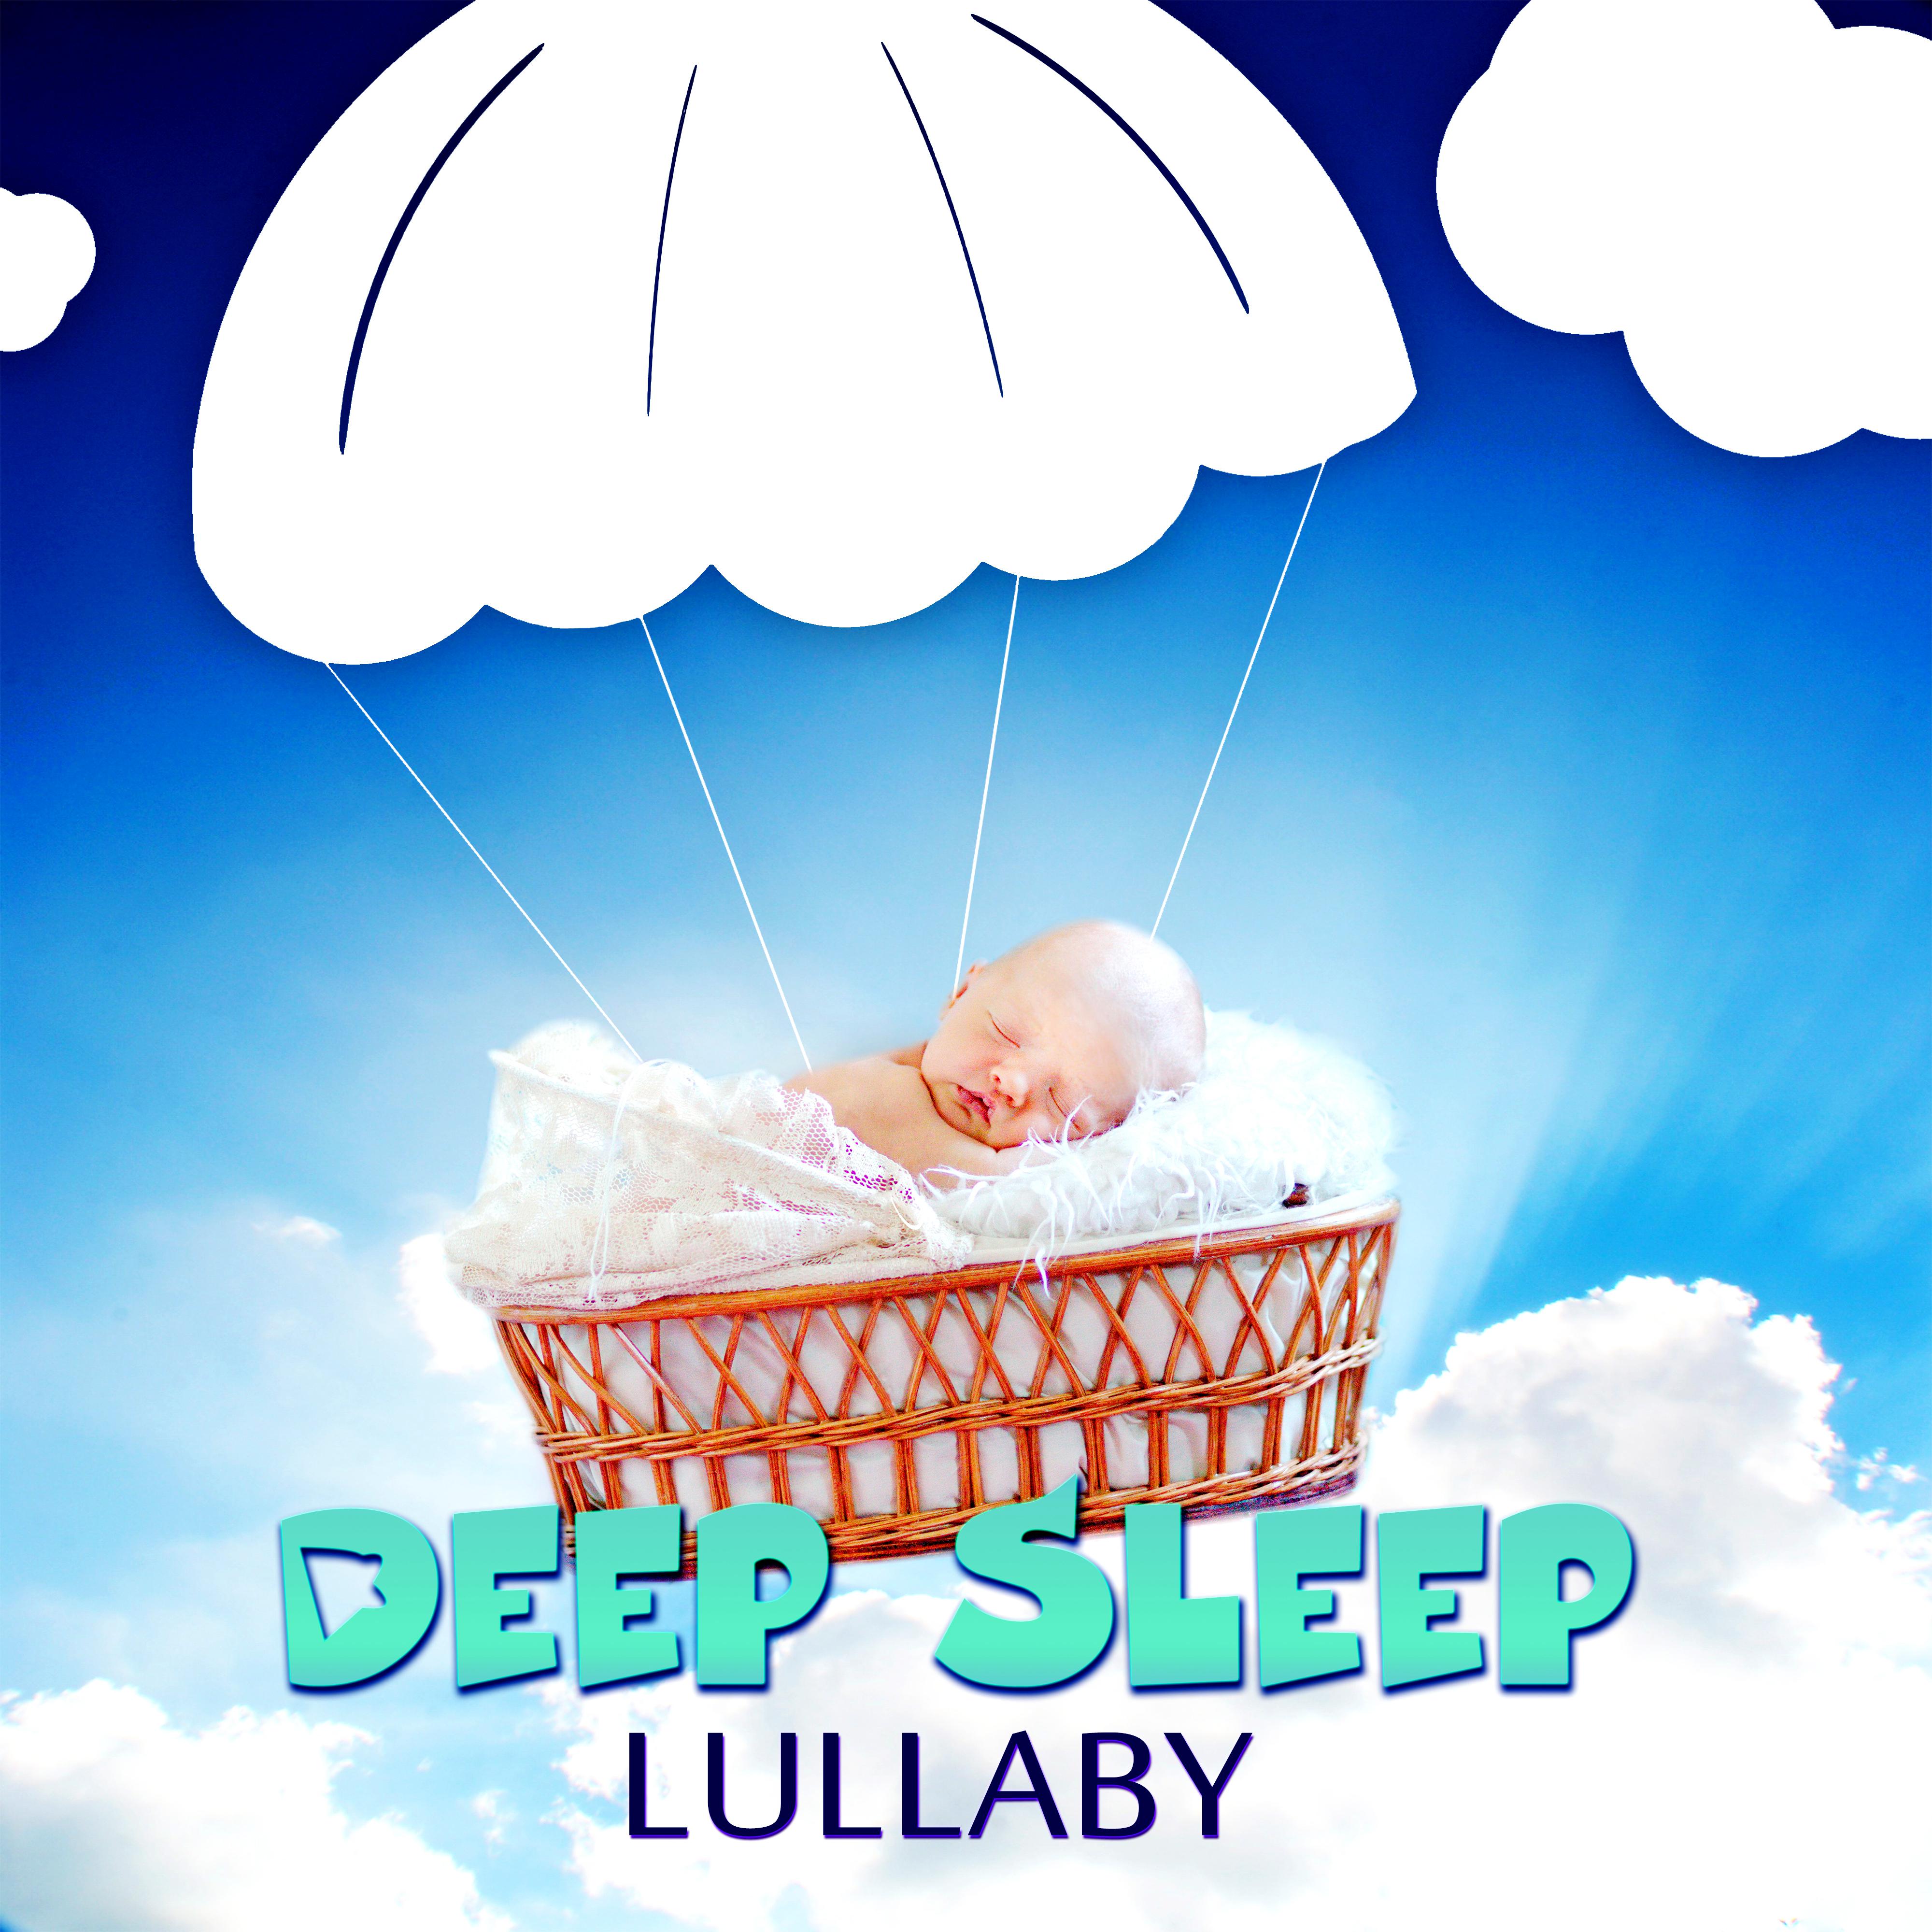 Deep Sleep Lullaby  Sleep Songs, Deep Relaxation Music with Sounds of Nature, Serenity Spa, Calming Sea Sounds, Singing Birds, Rainforest